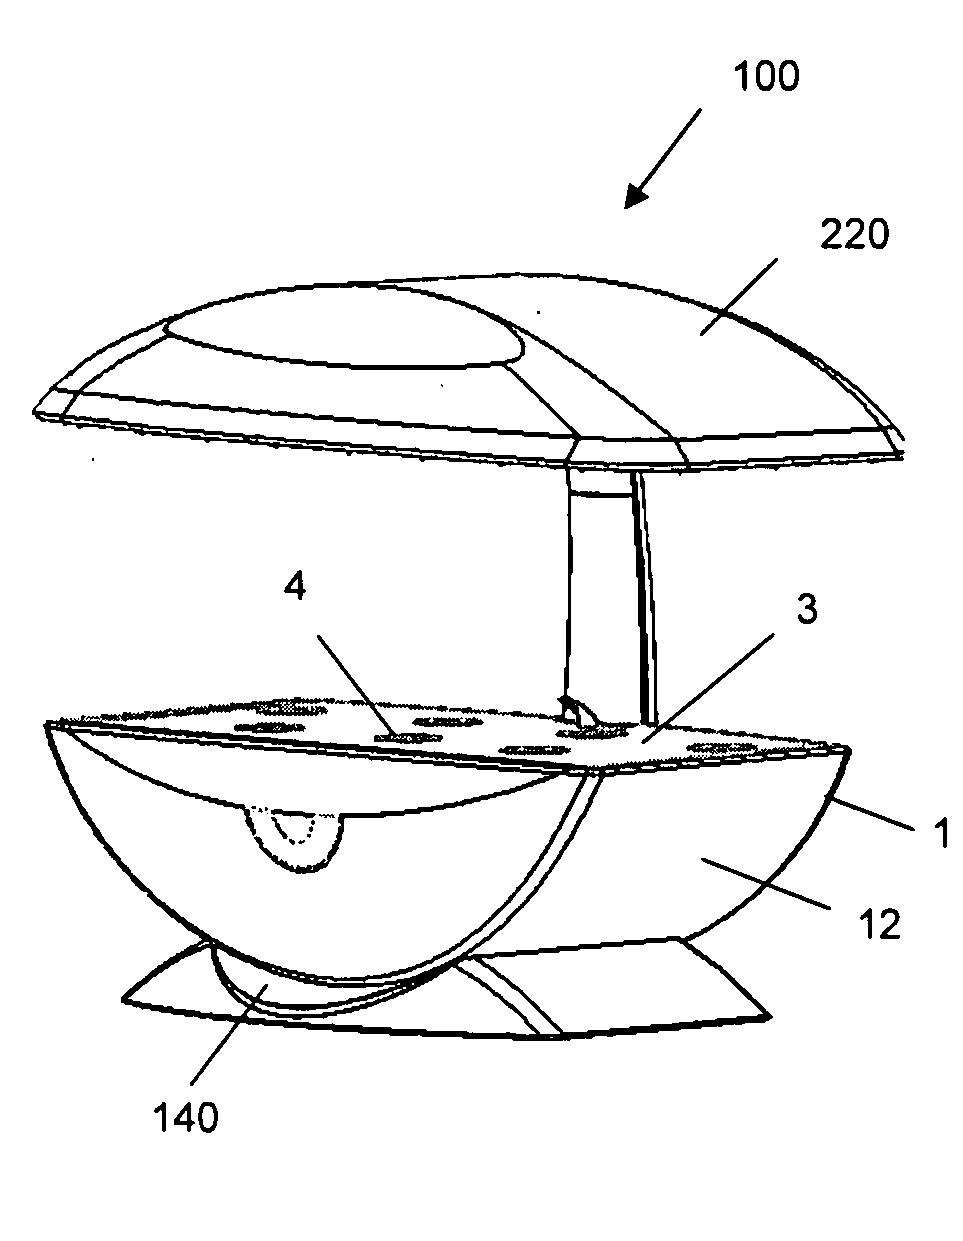 Devices and methods for growing plants